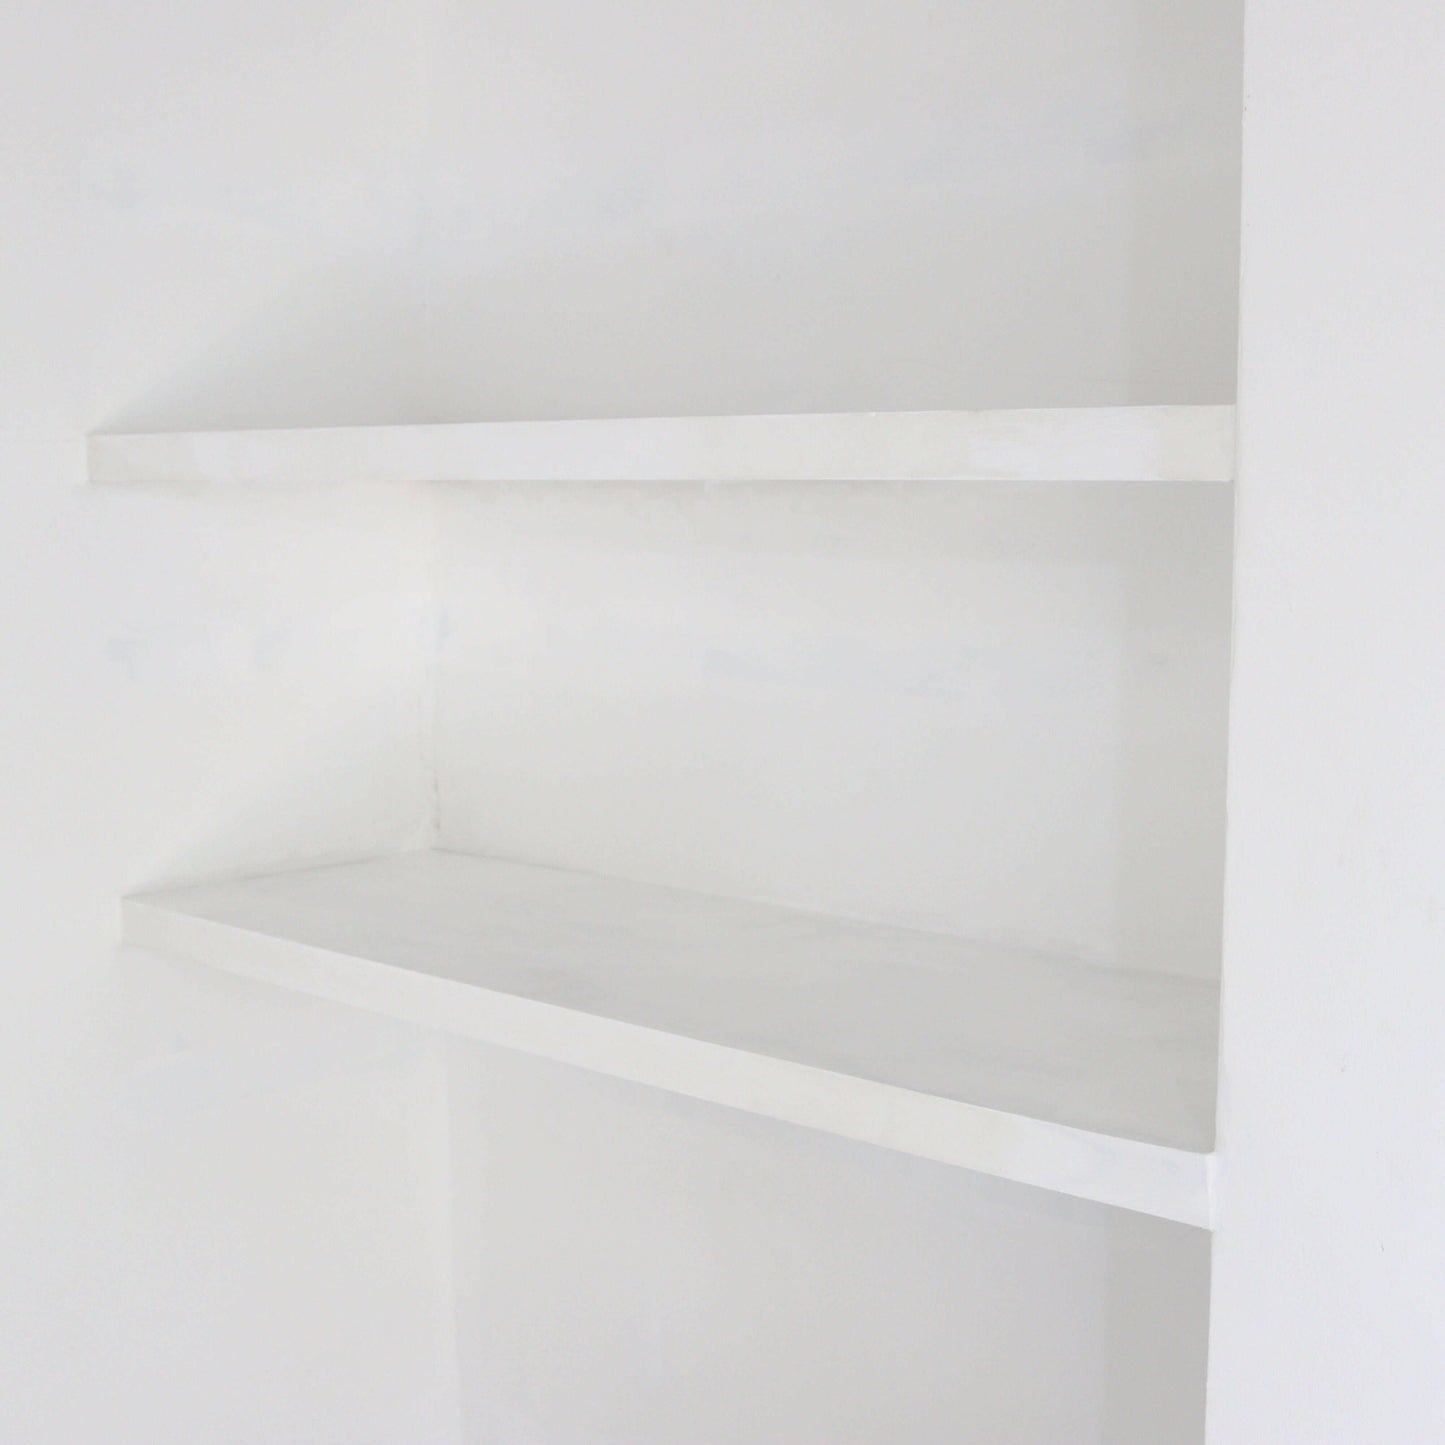 Paintable Alcove Floating Shelves - 94 cm by 20 cm